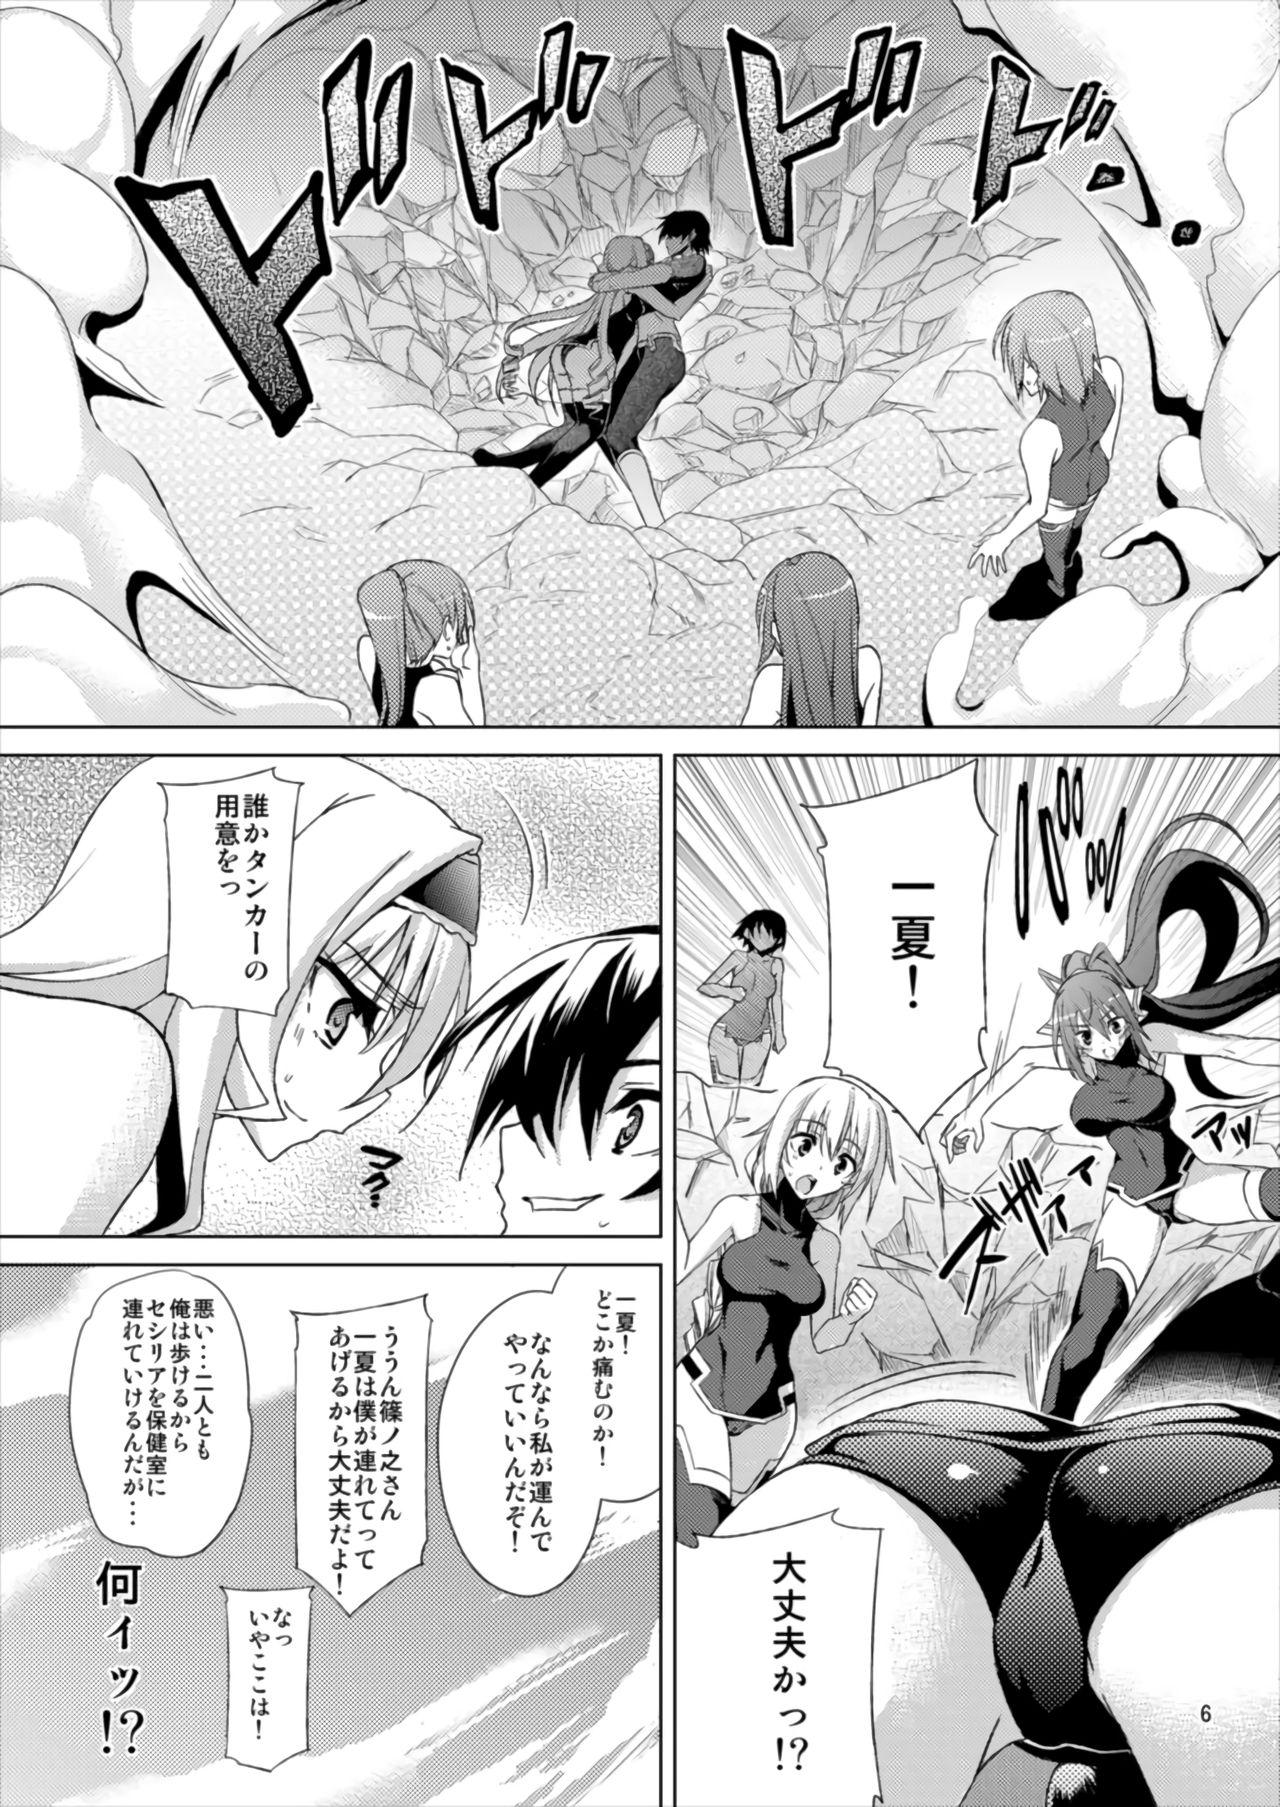 Comendo AFTER DREAM - Infinite stratos Amatures Gone Wild - Page 6